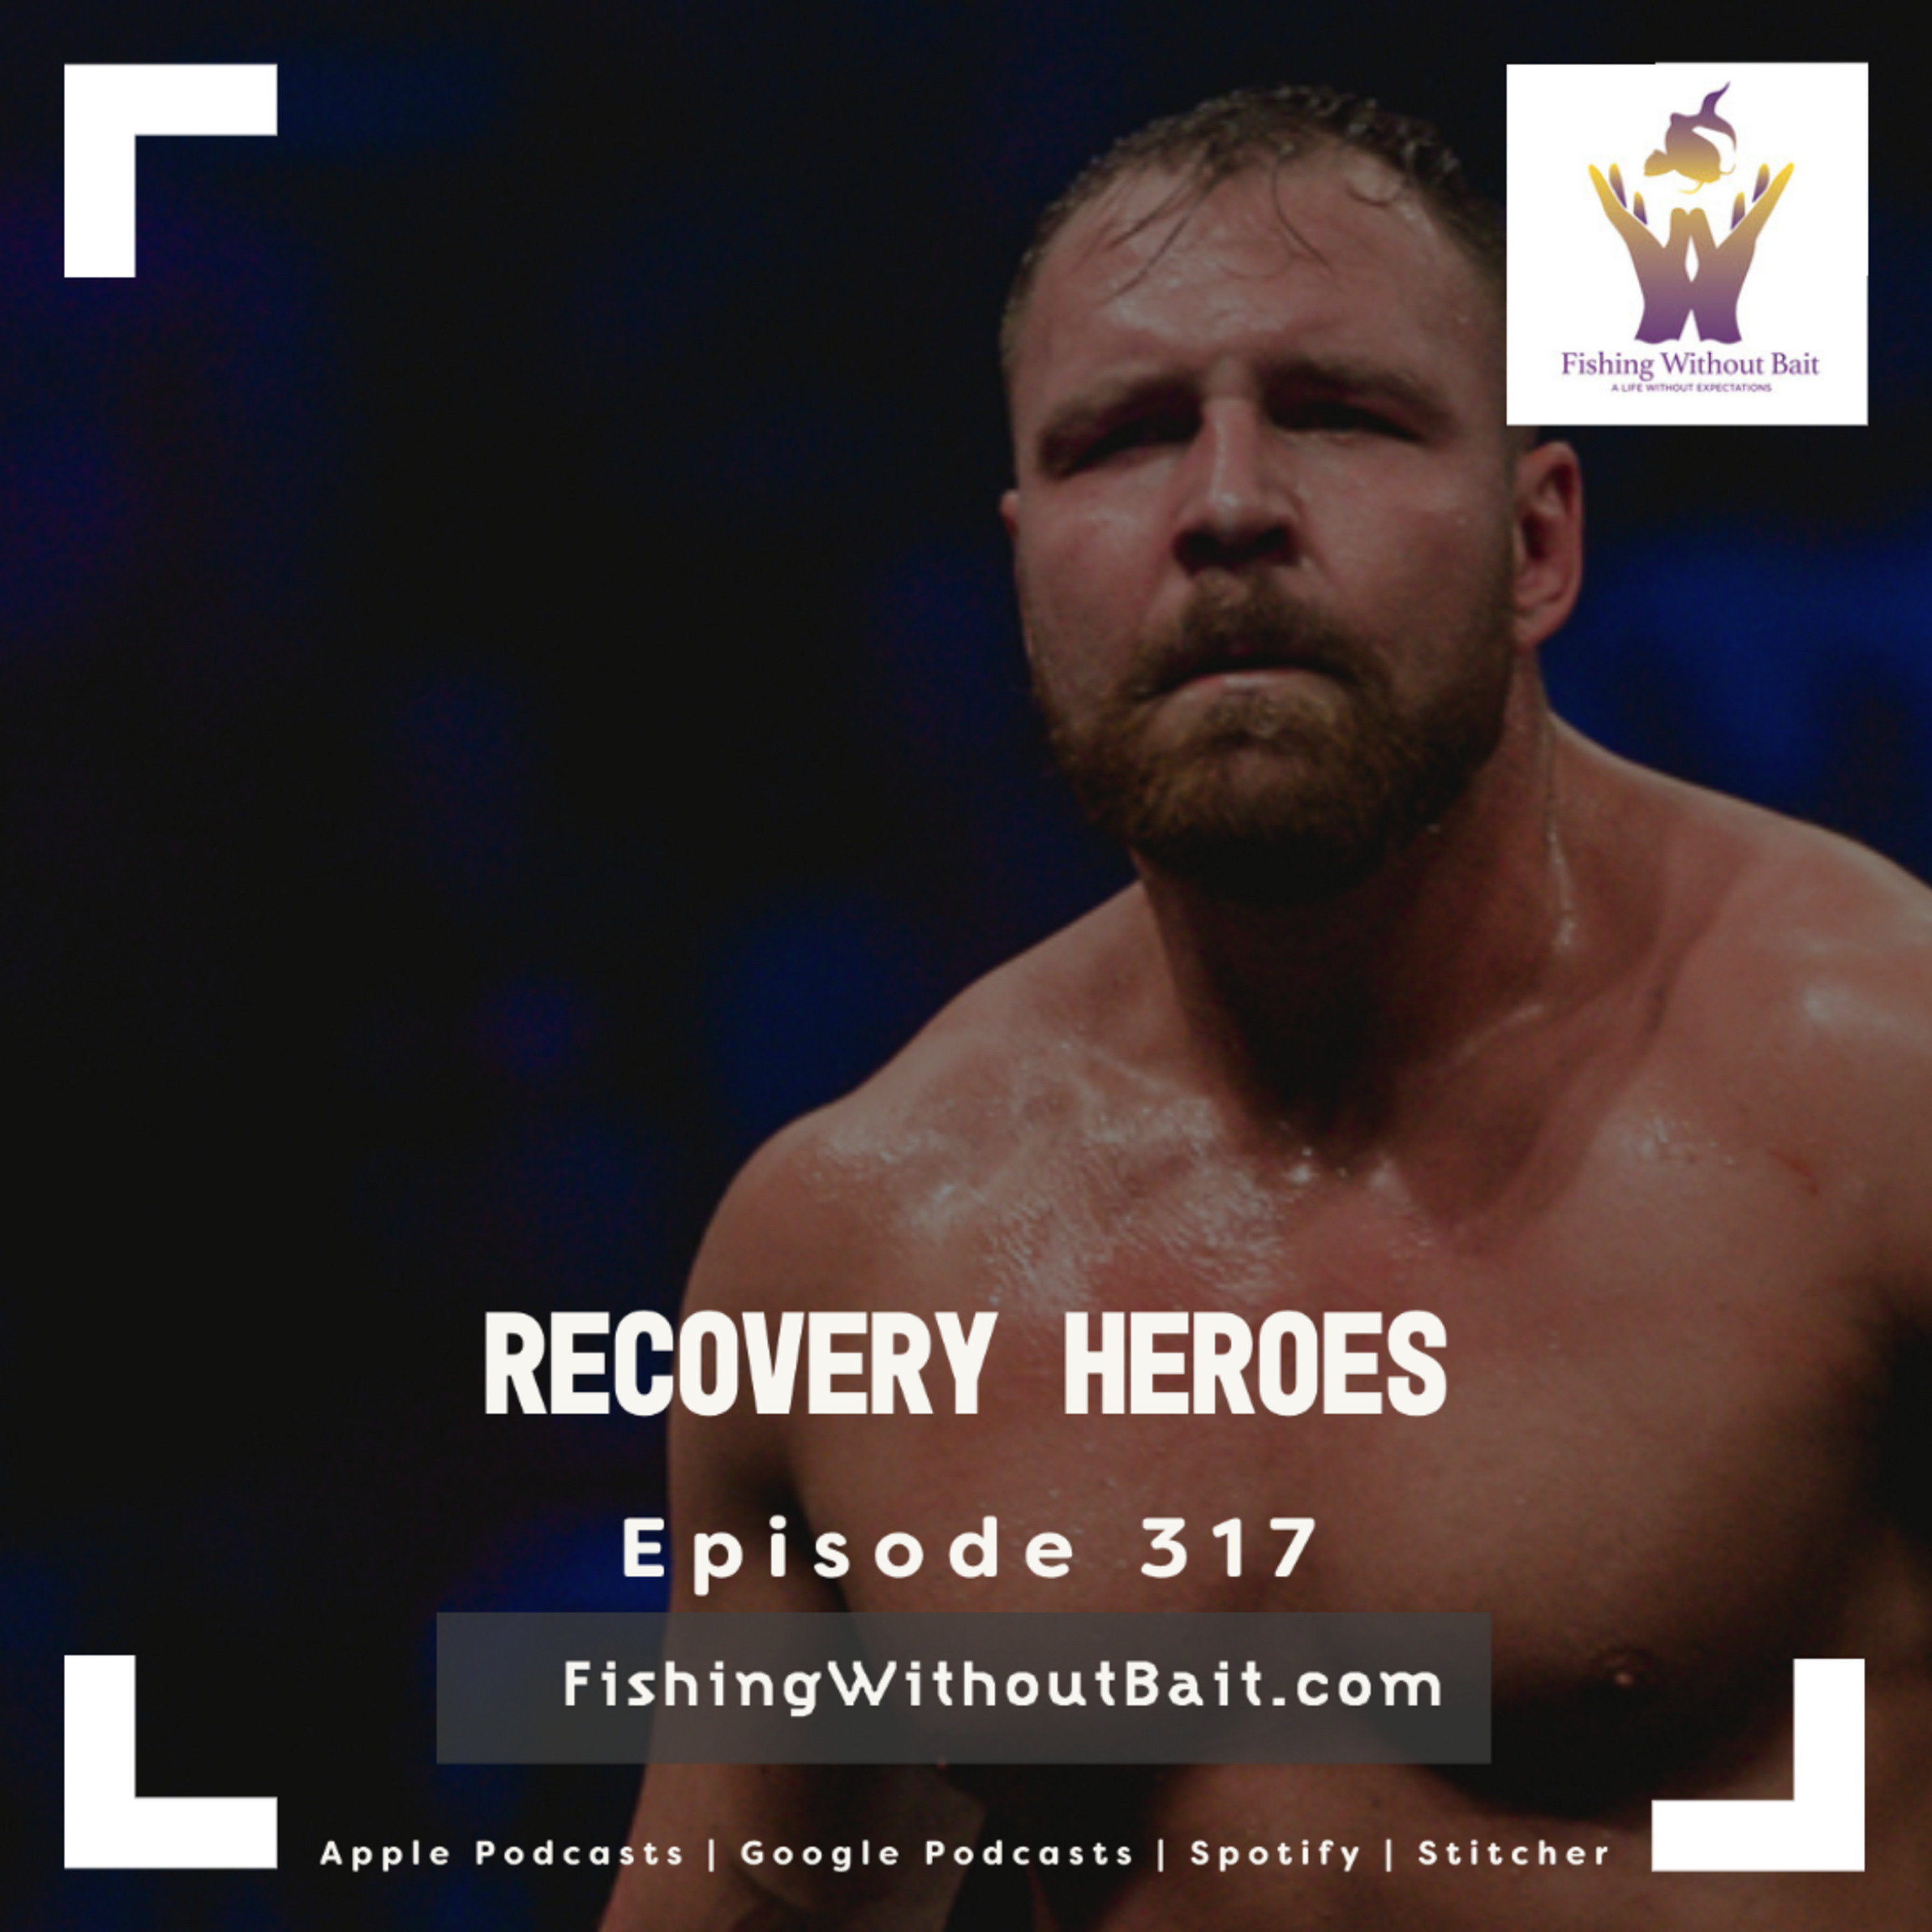 Recovery Heroes | Fishing Without Bait 317